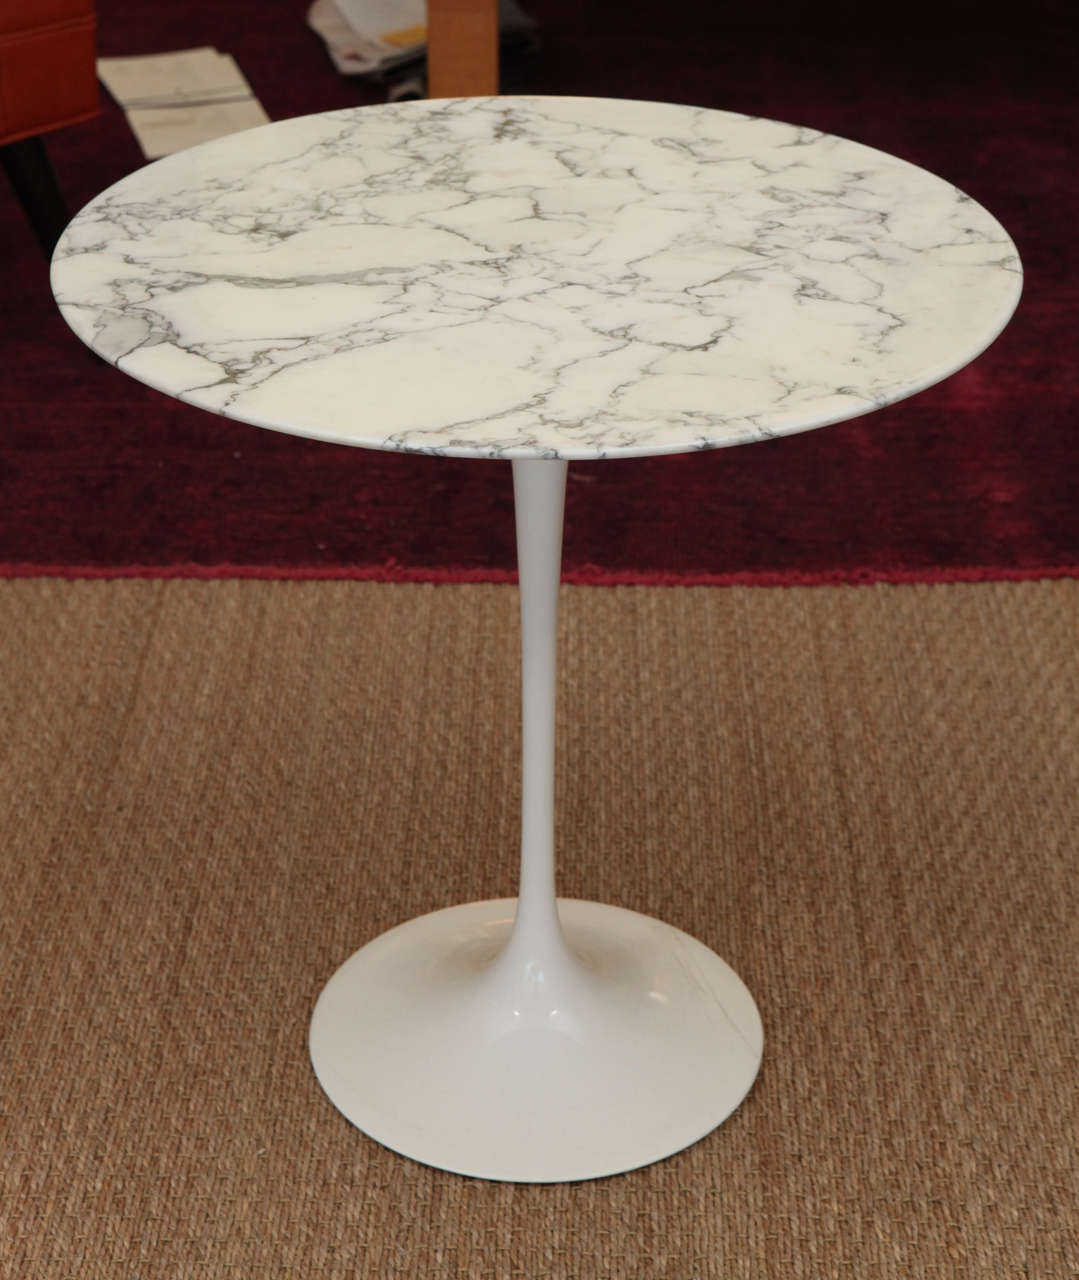 Arabescato marble top with white tulip base. This piece would look beautiful in any sitting room.